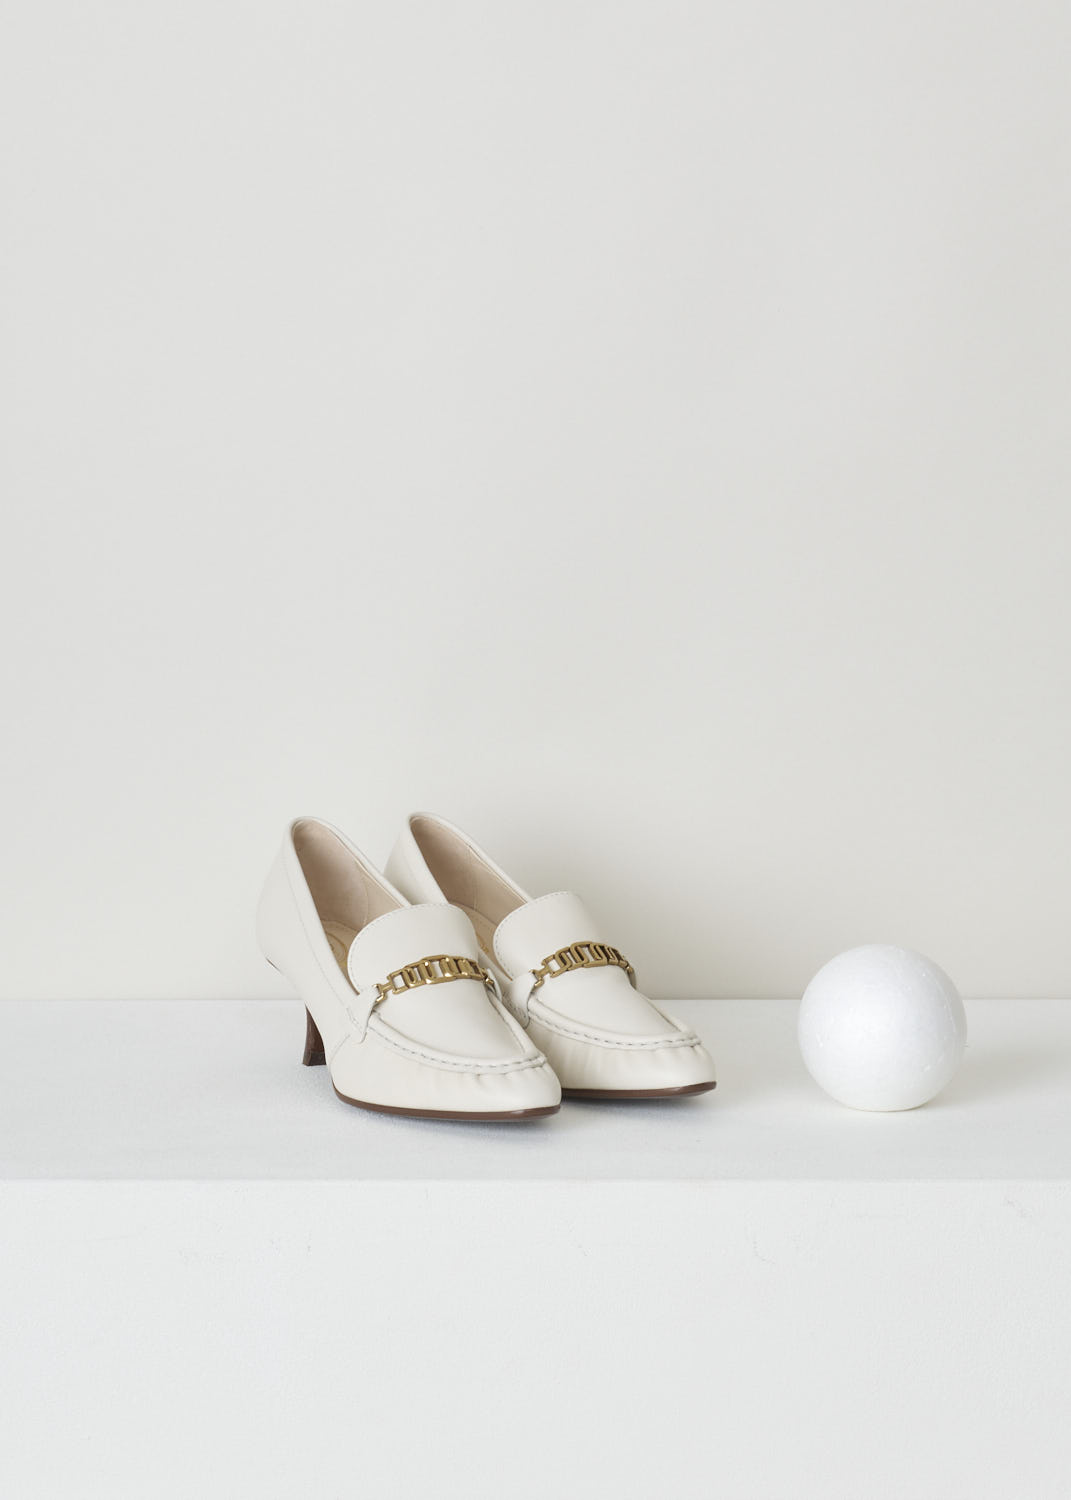 TODS, OFF-WHITE LEATHER LOAFERS WITH A TRAPEZOID HEEL, XXW09D0EC80_MID_B015, White, Front, Off-white leather loafers with a wooden trapezoid heel. This model has a pointed toe and a gold-toned buckle decorating the front. Around the trim, the leather is subtly pleated.


Heel height: 6 cm / 2.3 inch. 
